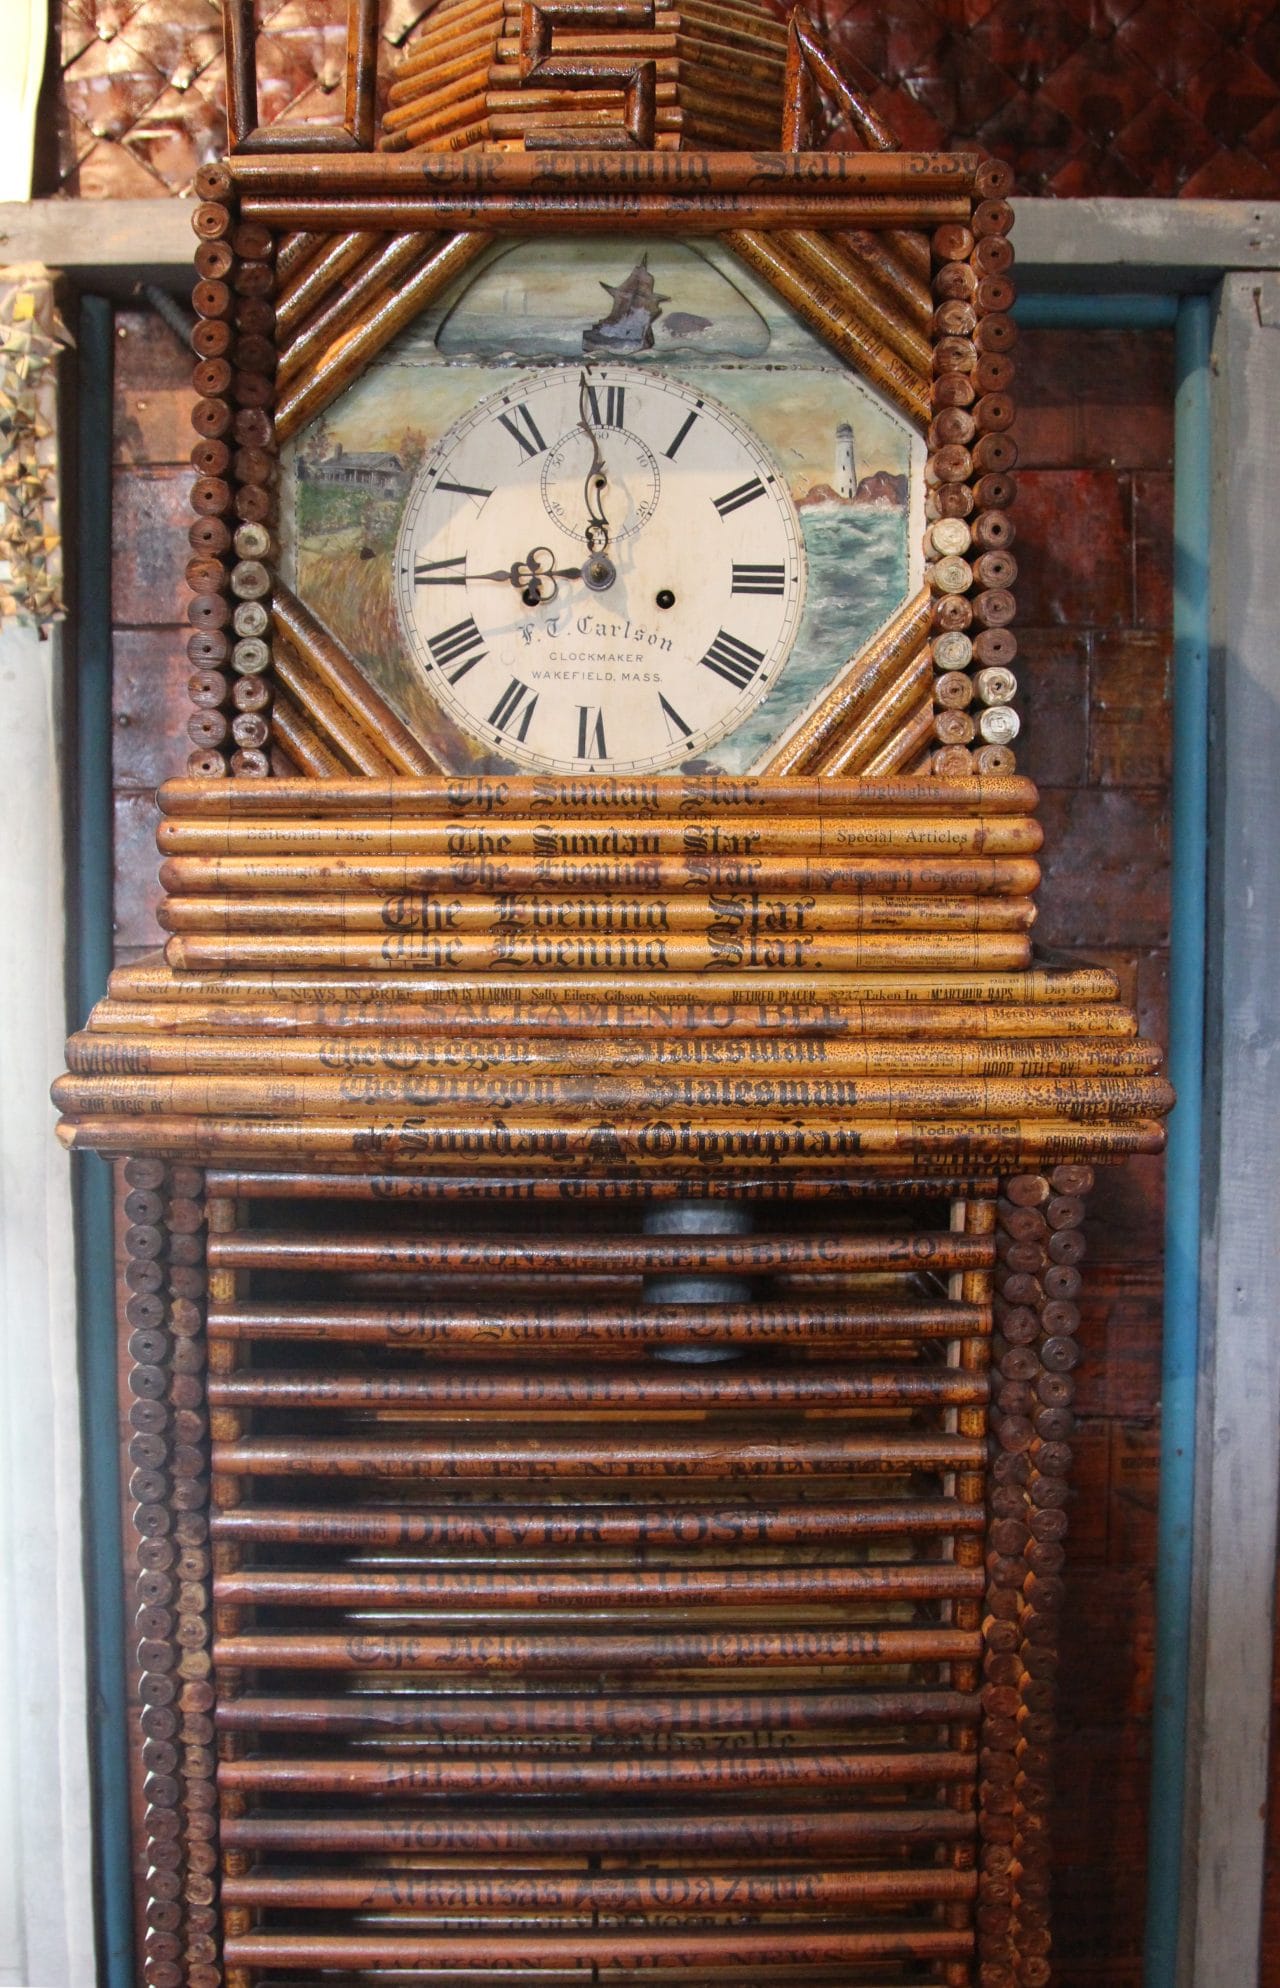 The grandfather clock in the Paper House